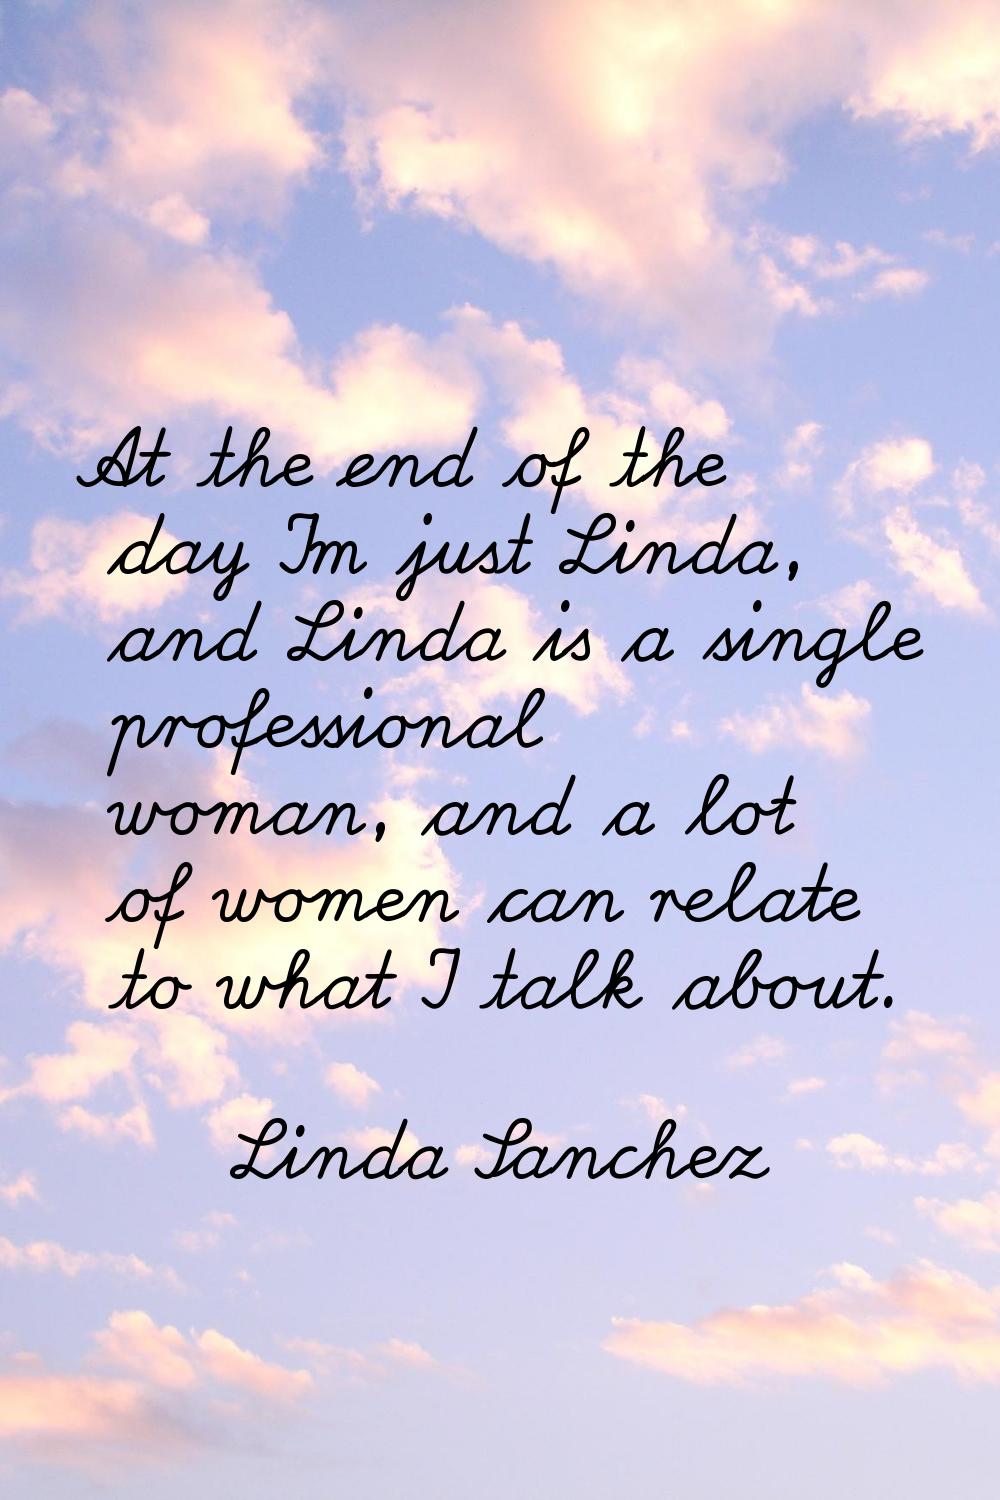 At the end of the day I'm just Linda, and Linda is a single professional woman, and a lot of women 